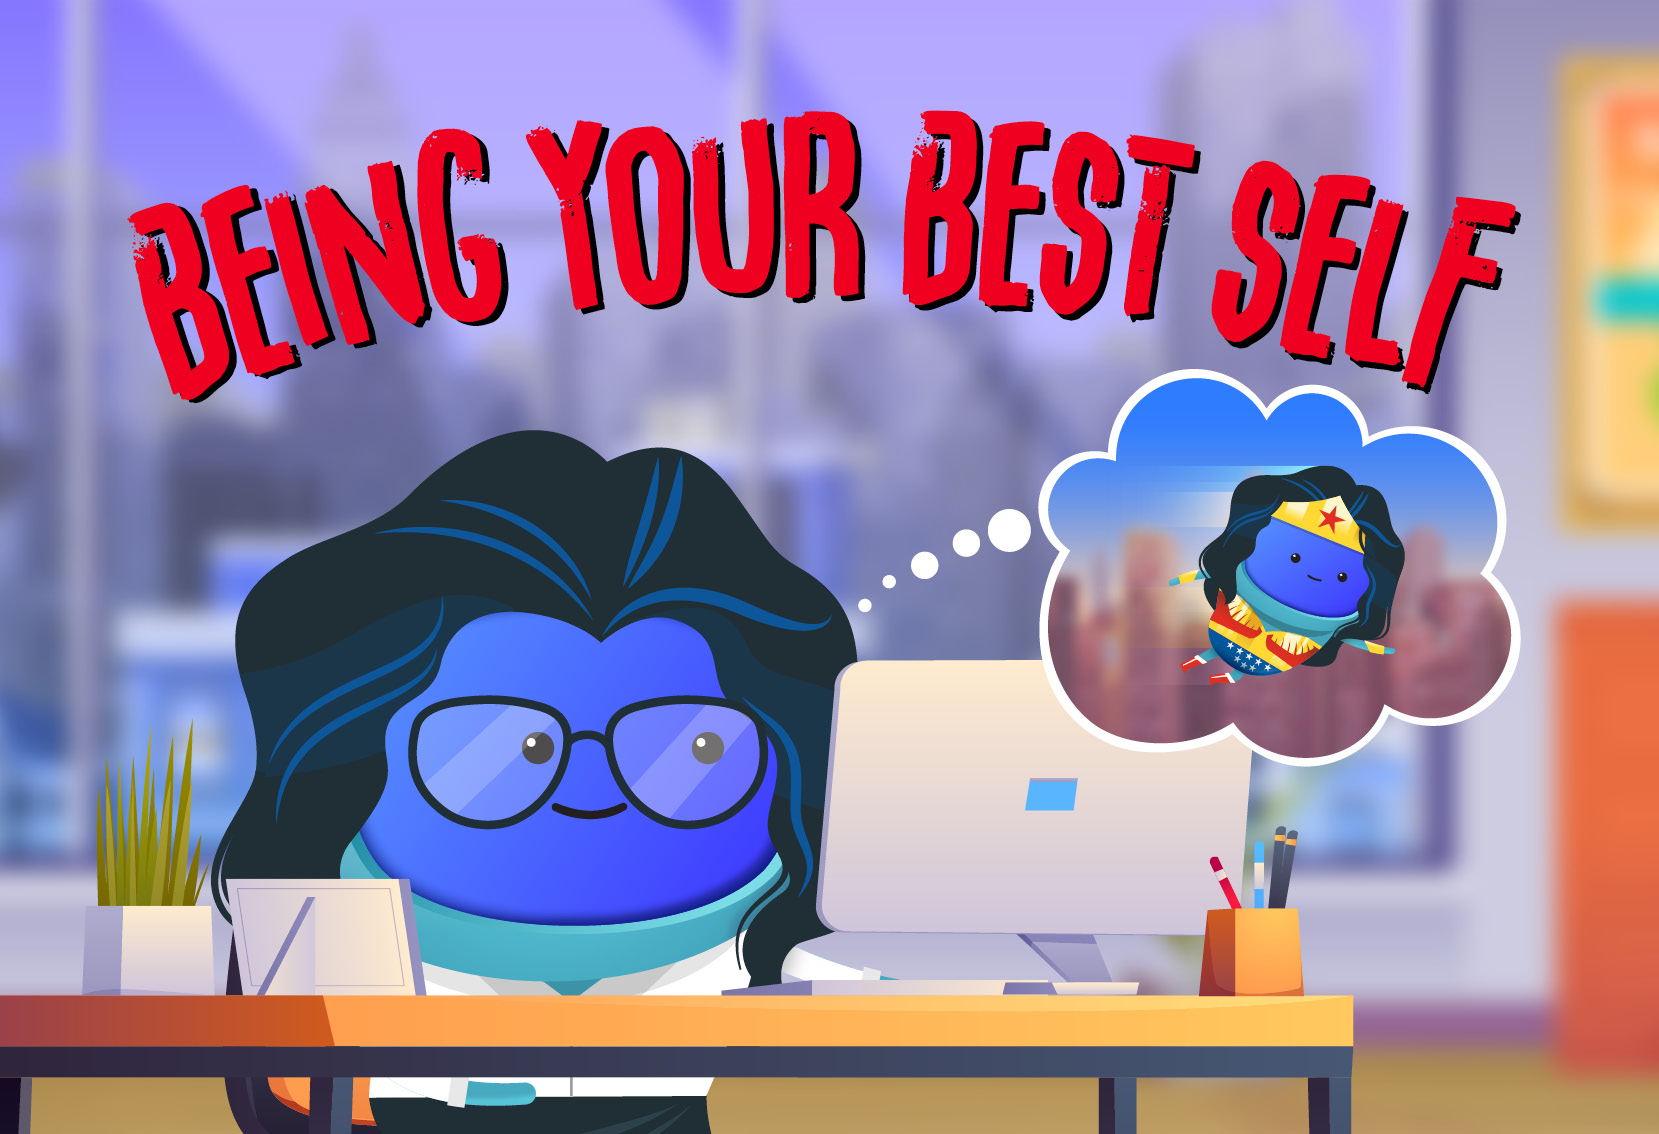 iAM 00227 - Being your Best Self - LMS Thumbnail